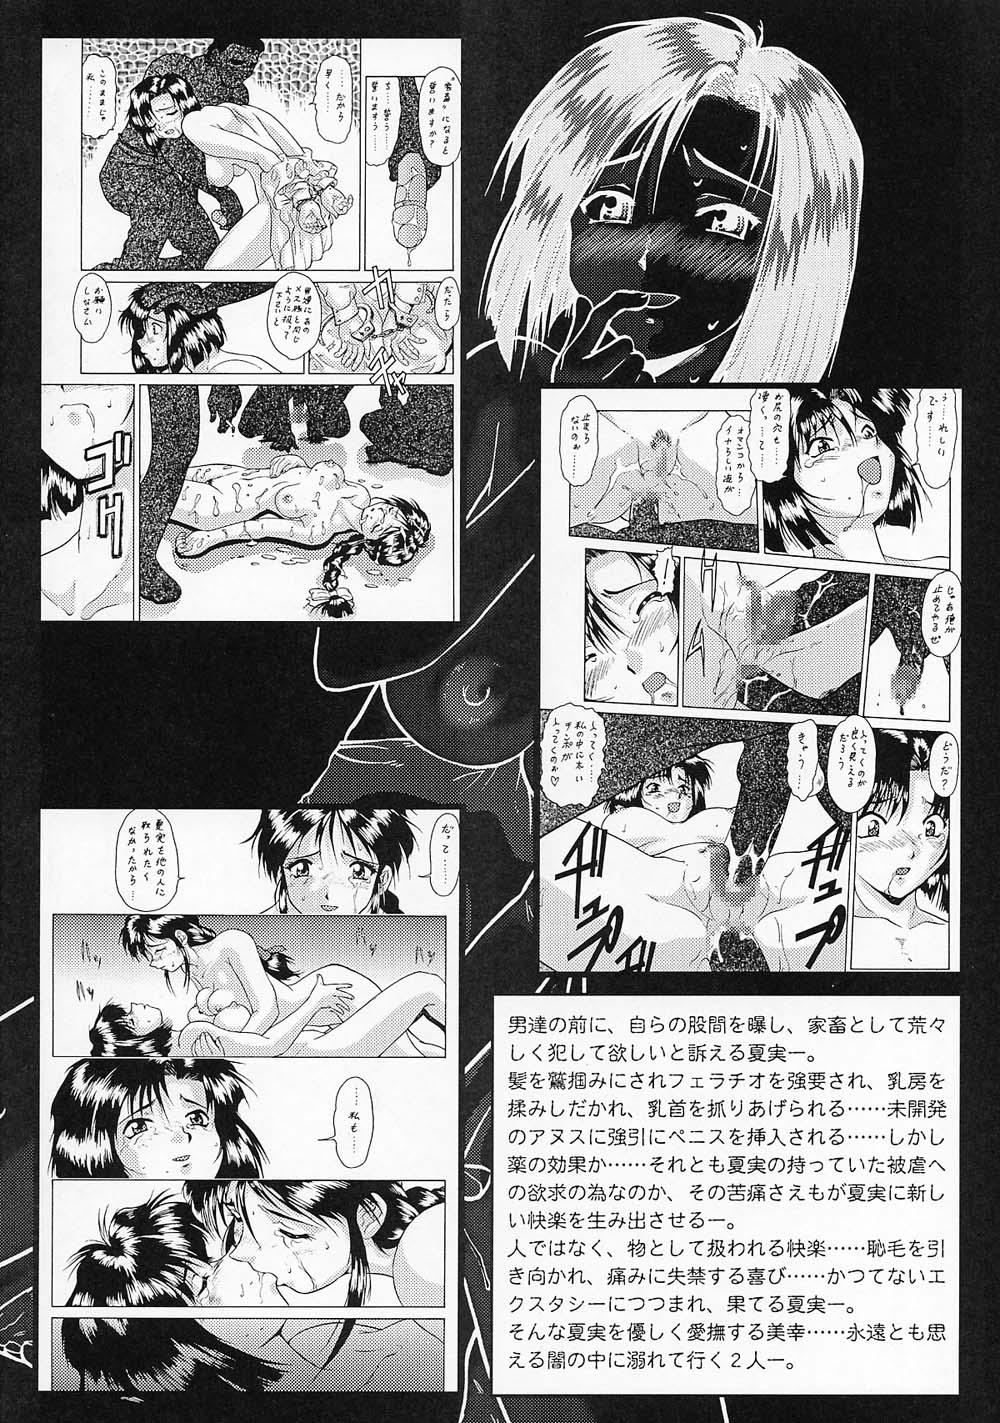 Spooning Taiho Shichauzo The Doujin Vol. 3 - Youre under arrest Pete - Page 8